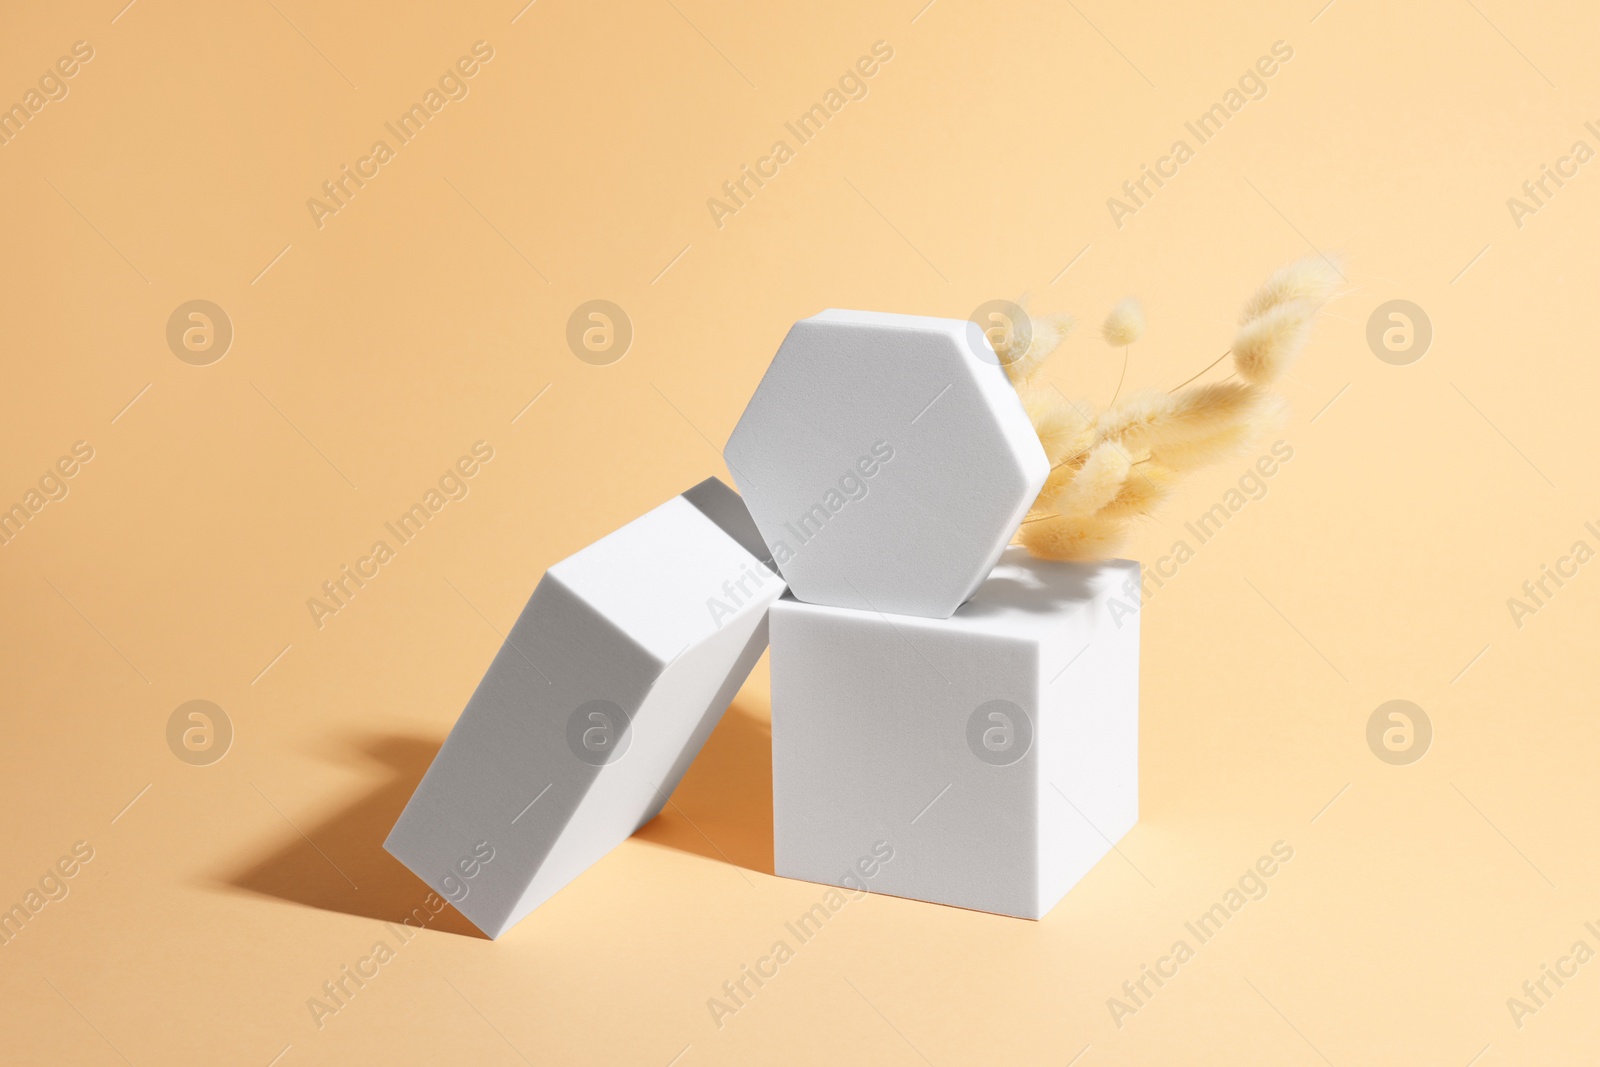 Photo of Scene with podium for product presentation. Figures of different geometric shapes and dry plant on pale orange background